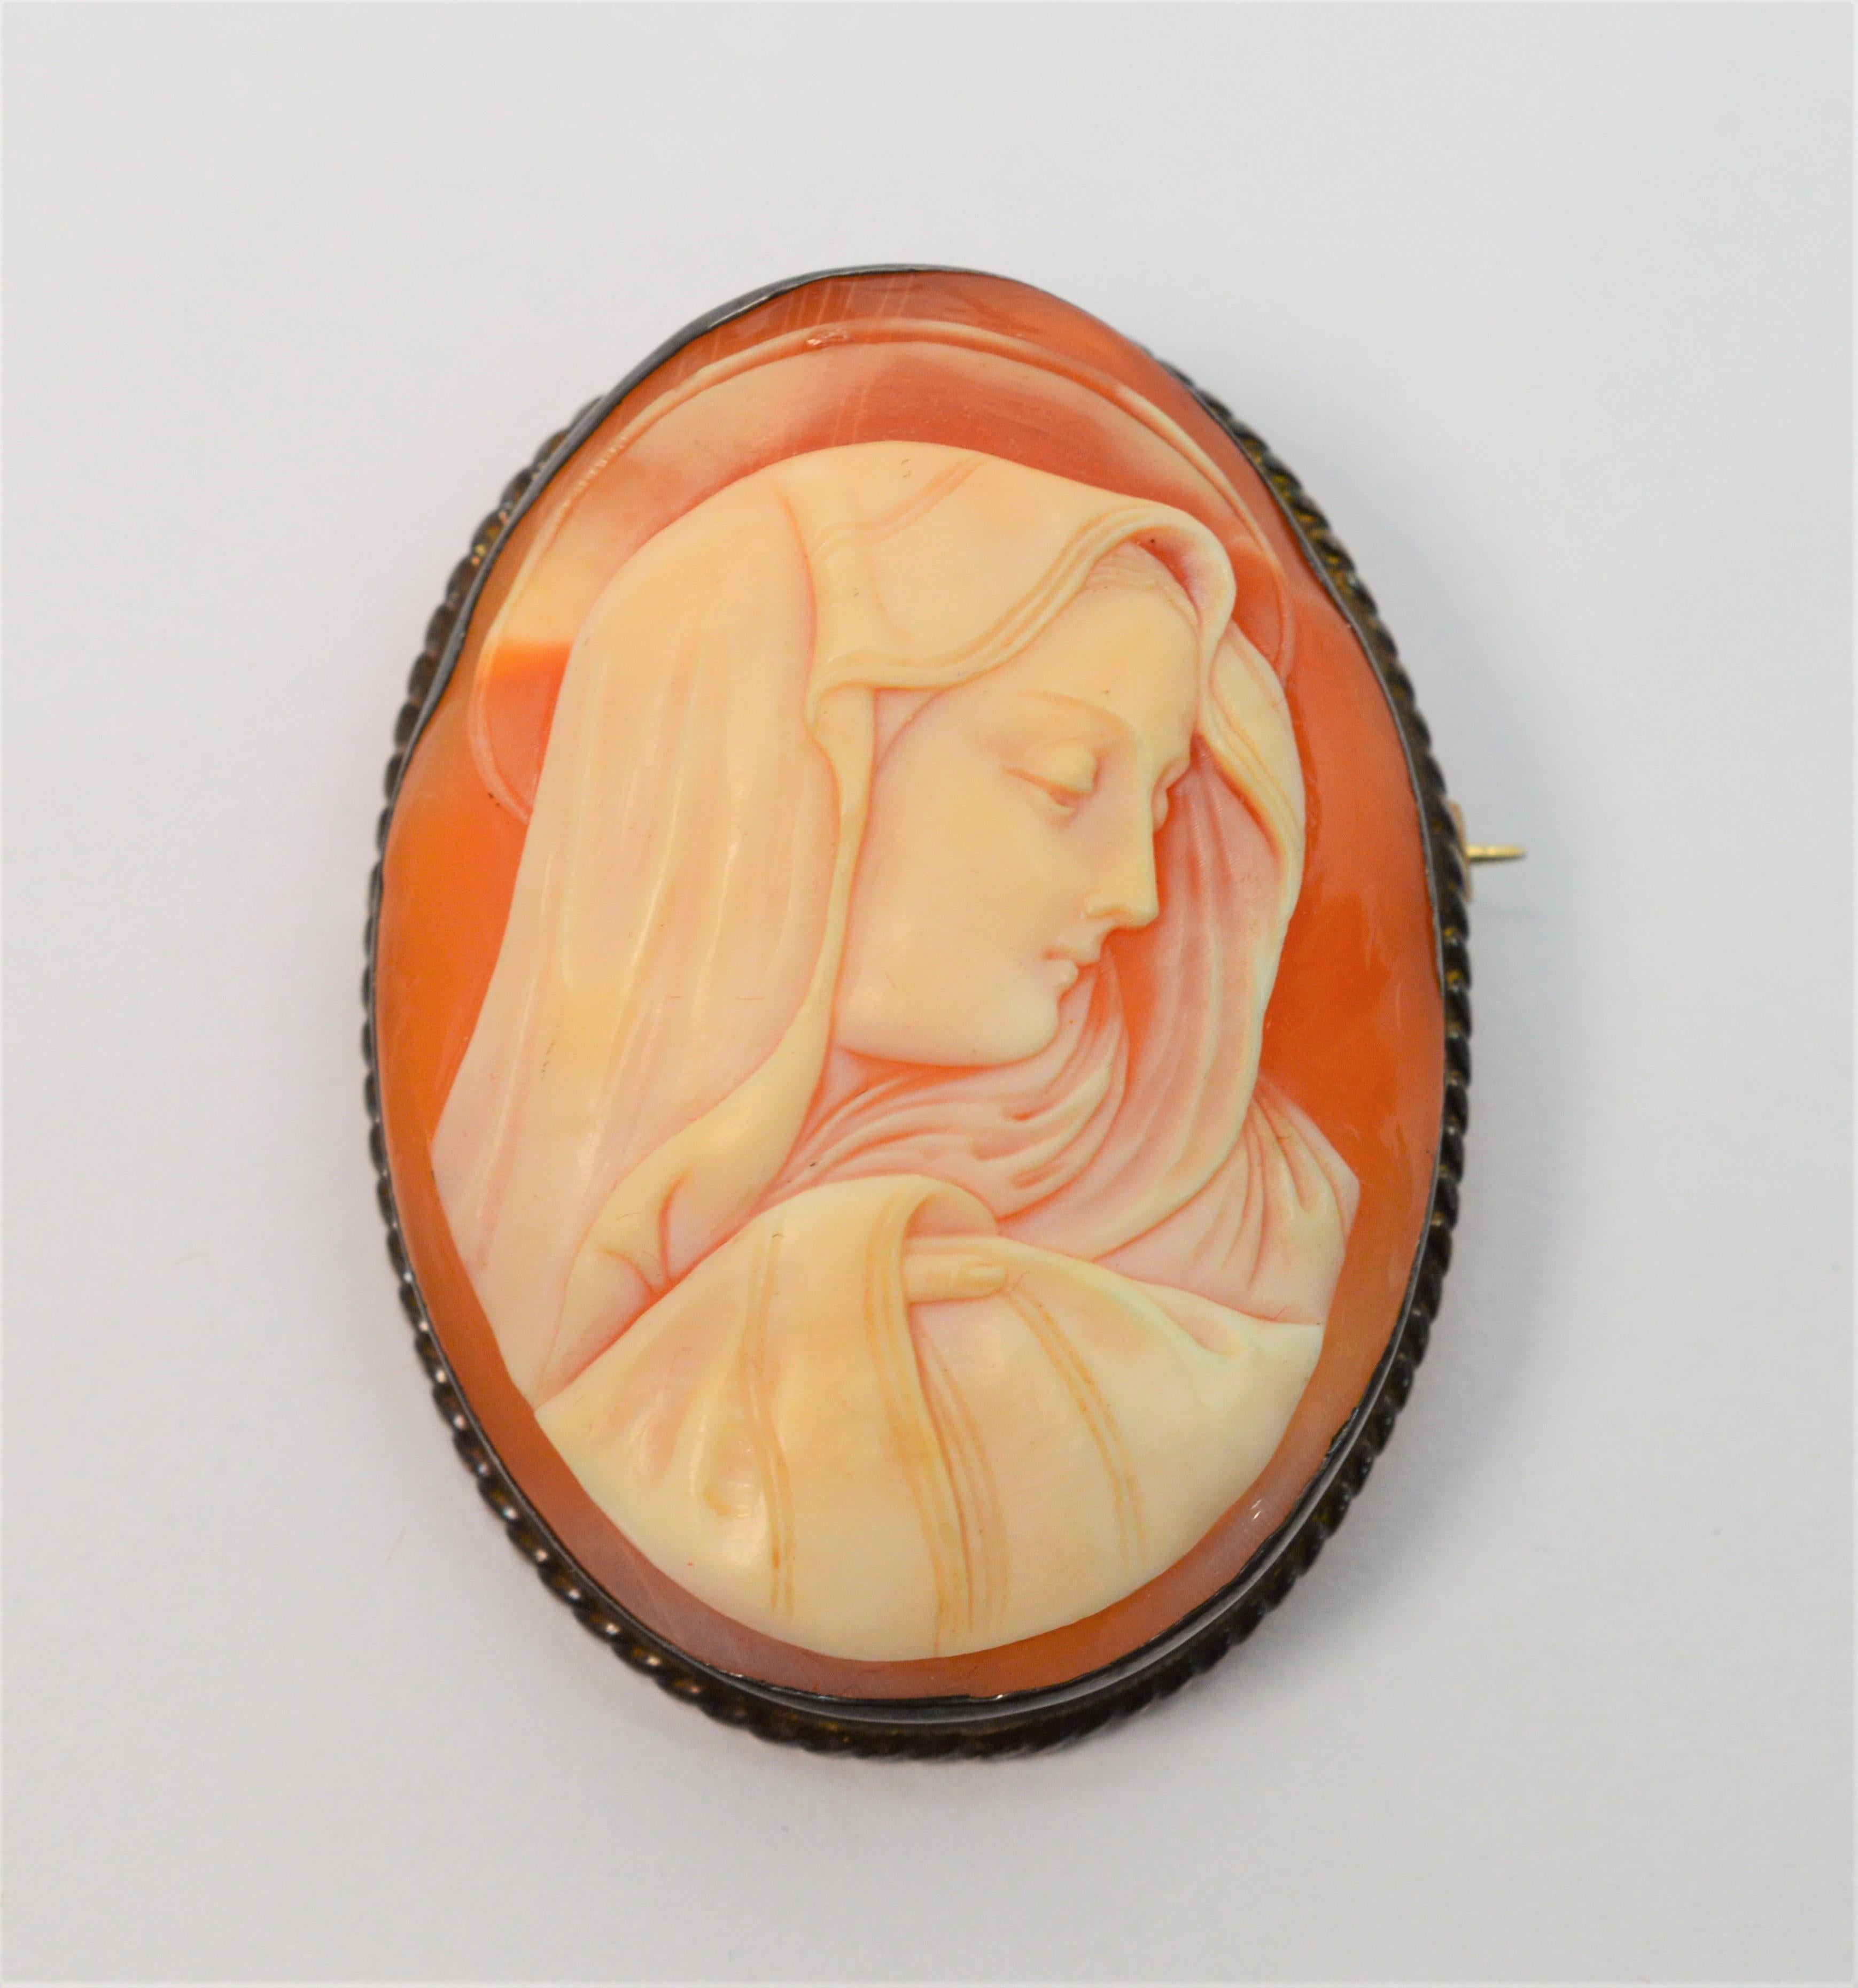 An inspiring portrait of the Blessed Mother is hand carved to create this lovely oval antique shell cameo brooch. Artisan framed in toned sterling silver, the Madonna's image has extraordinary fine life-like detail. This endearing piece can be